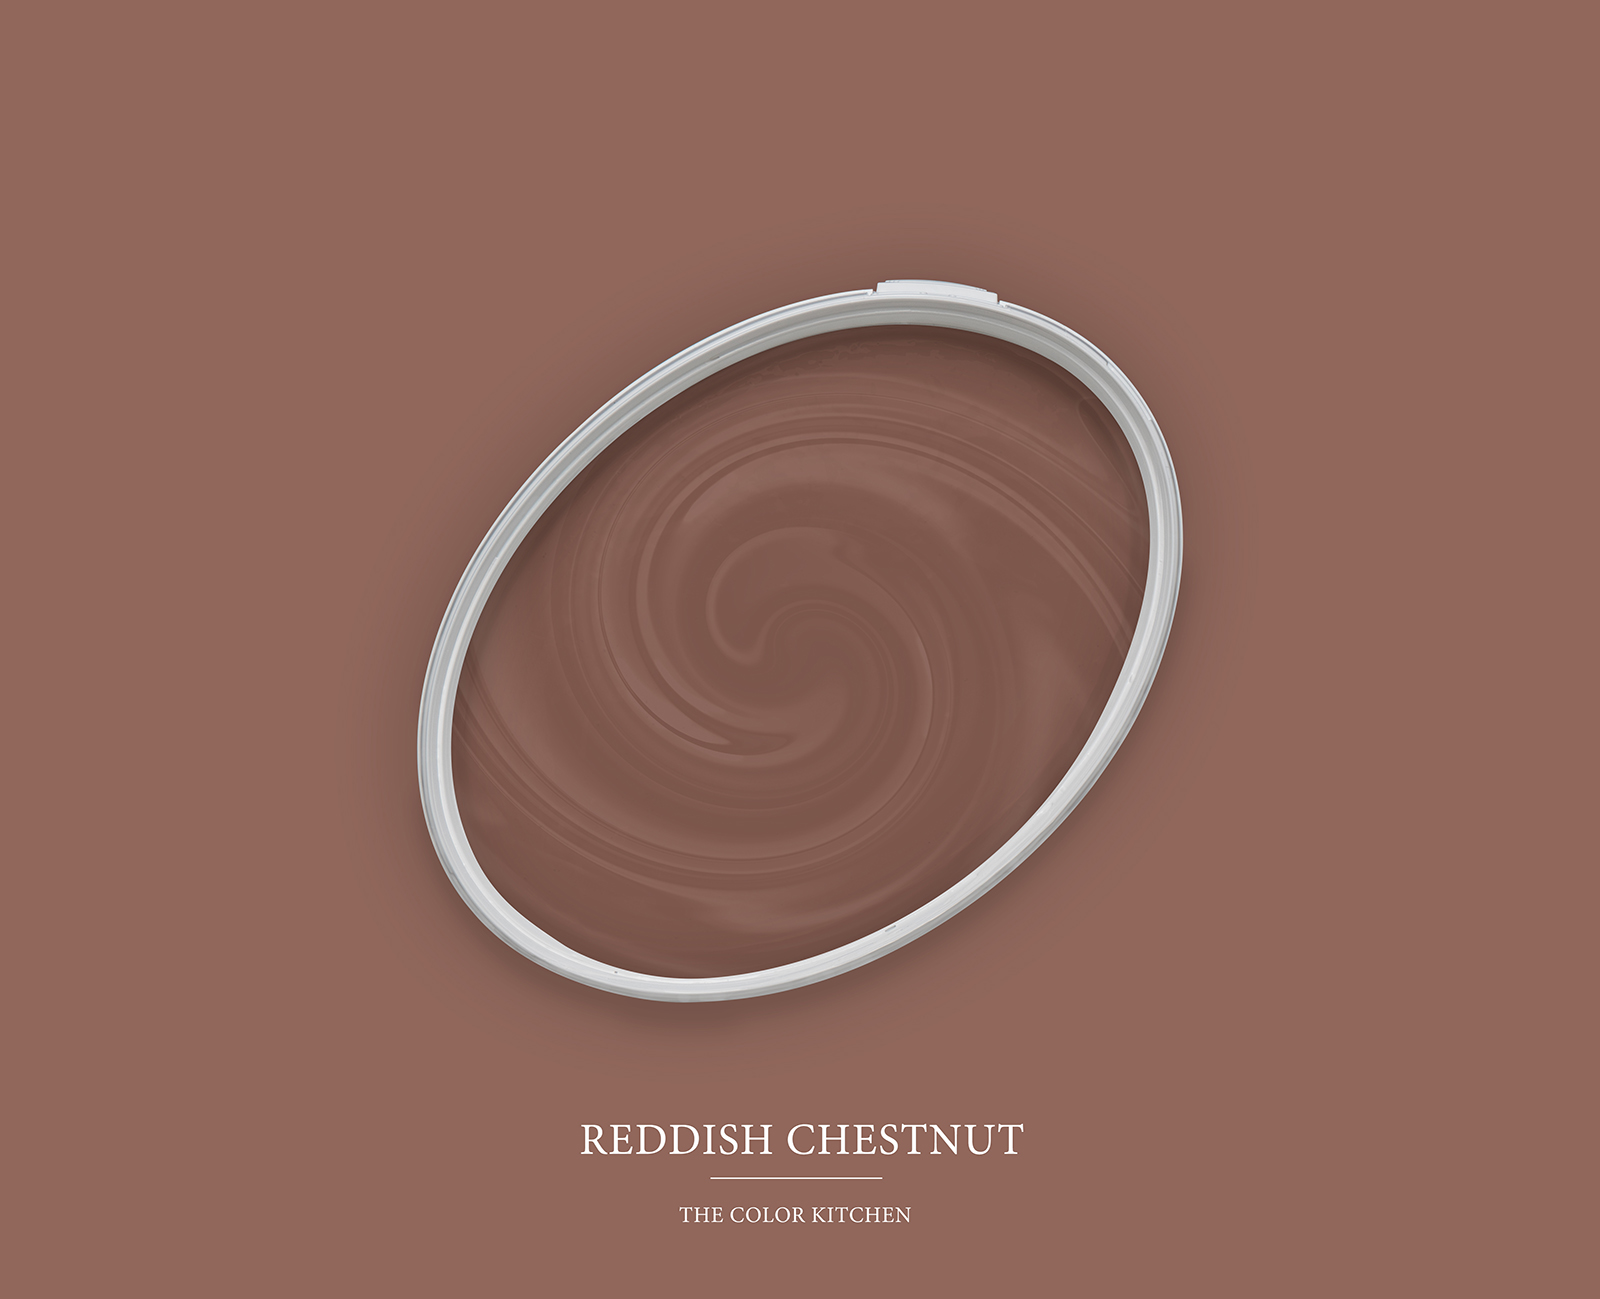 Wall Paint TCK5014 »Reddish Chestnut« in magnificent red-brown – 5.0 litre
